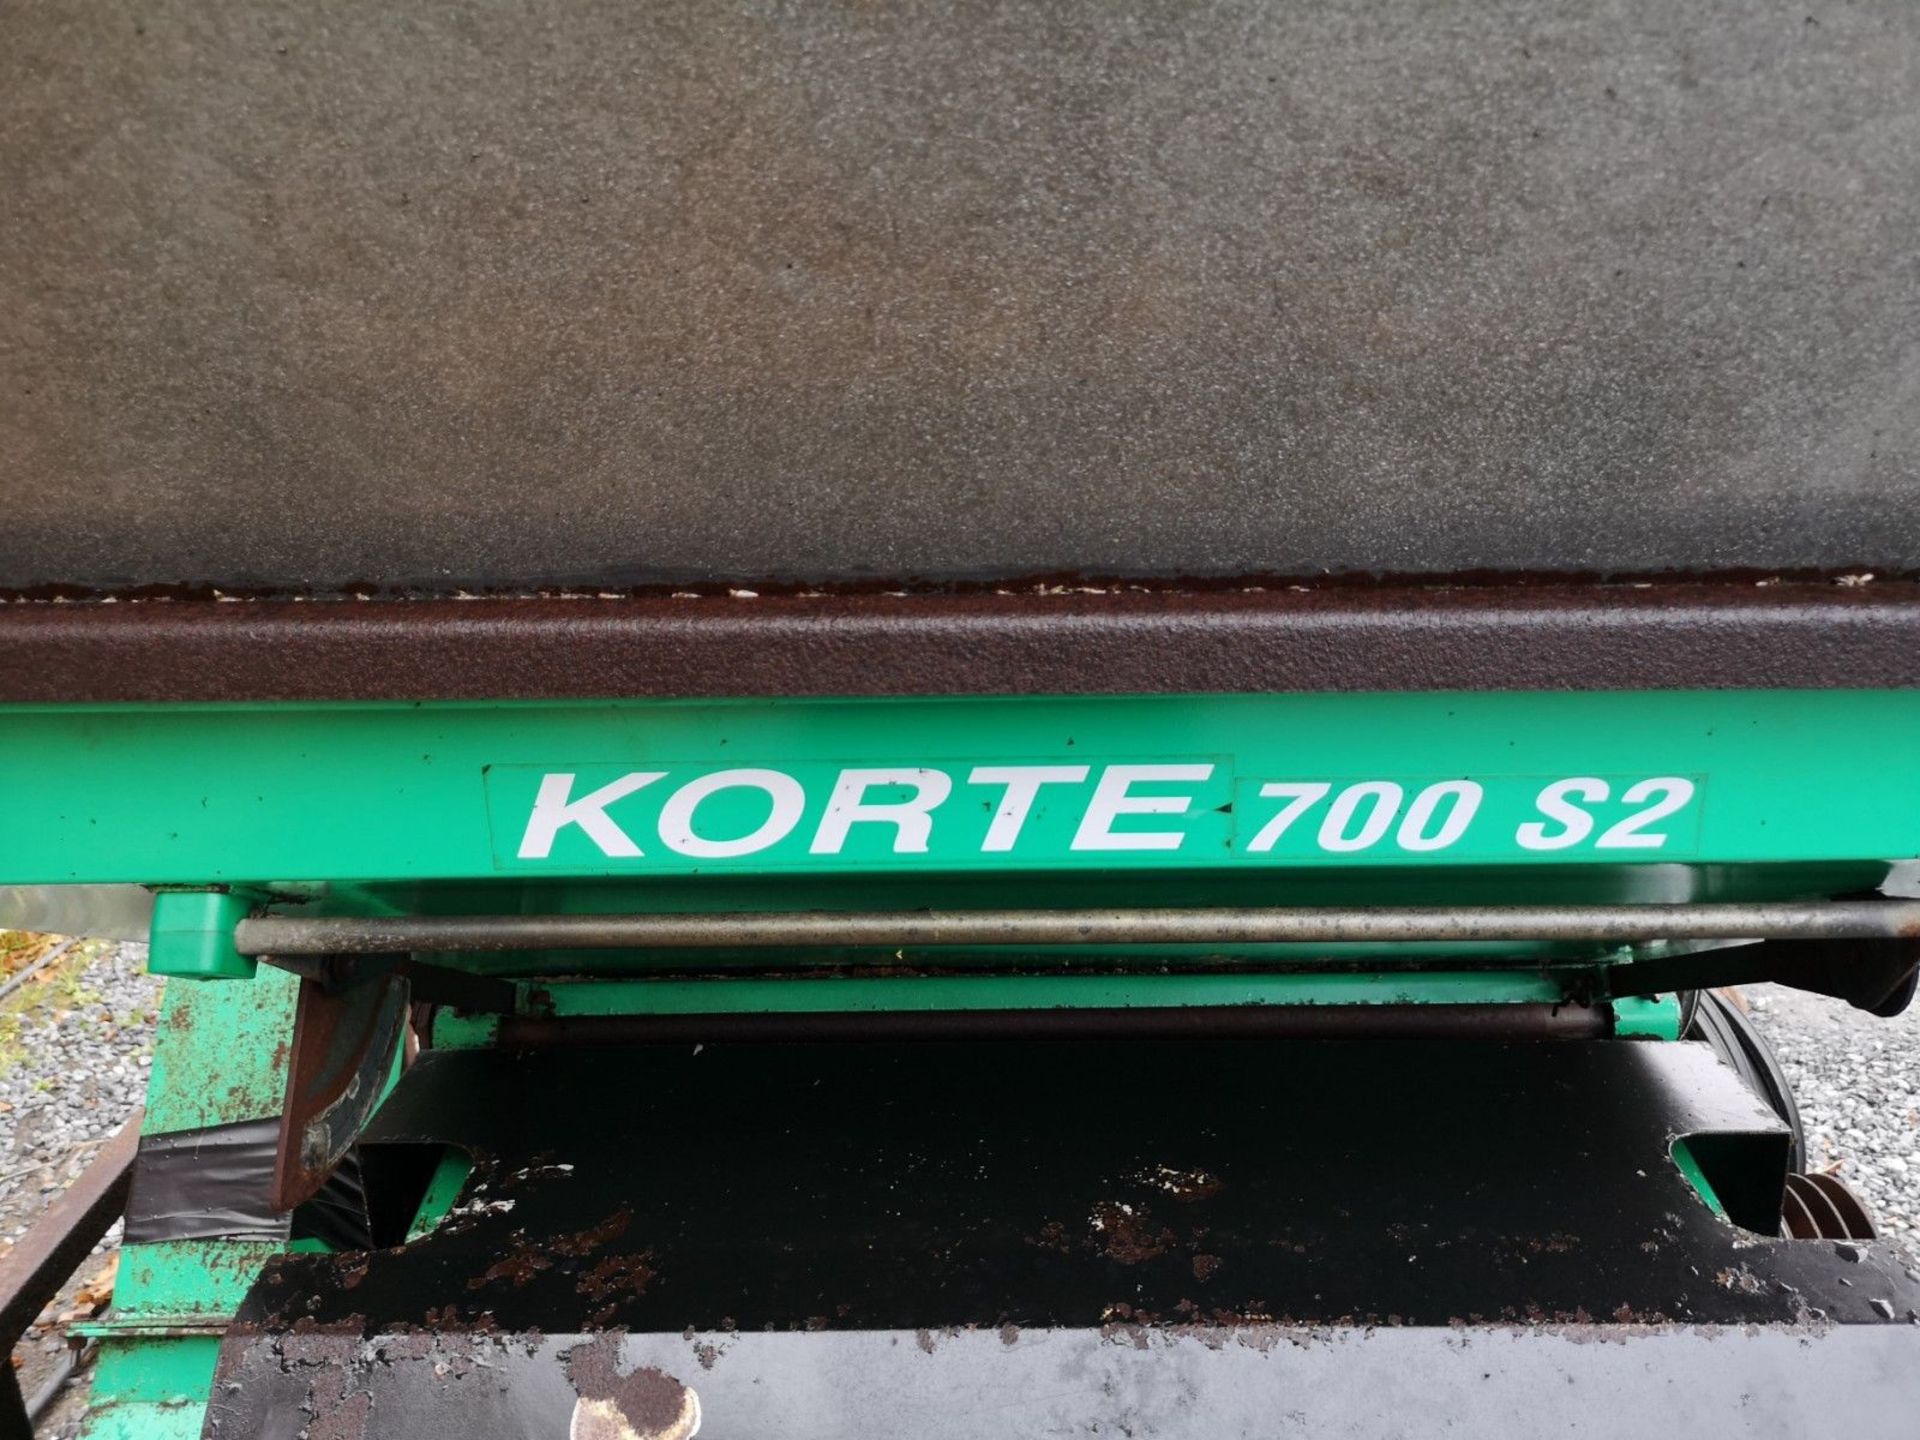 Korte 700 S2 High Output Roller Mill With Auger - Image 8 of 10